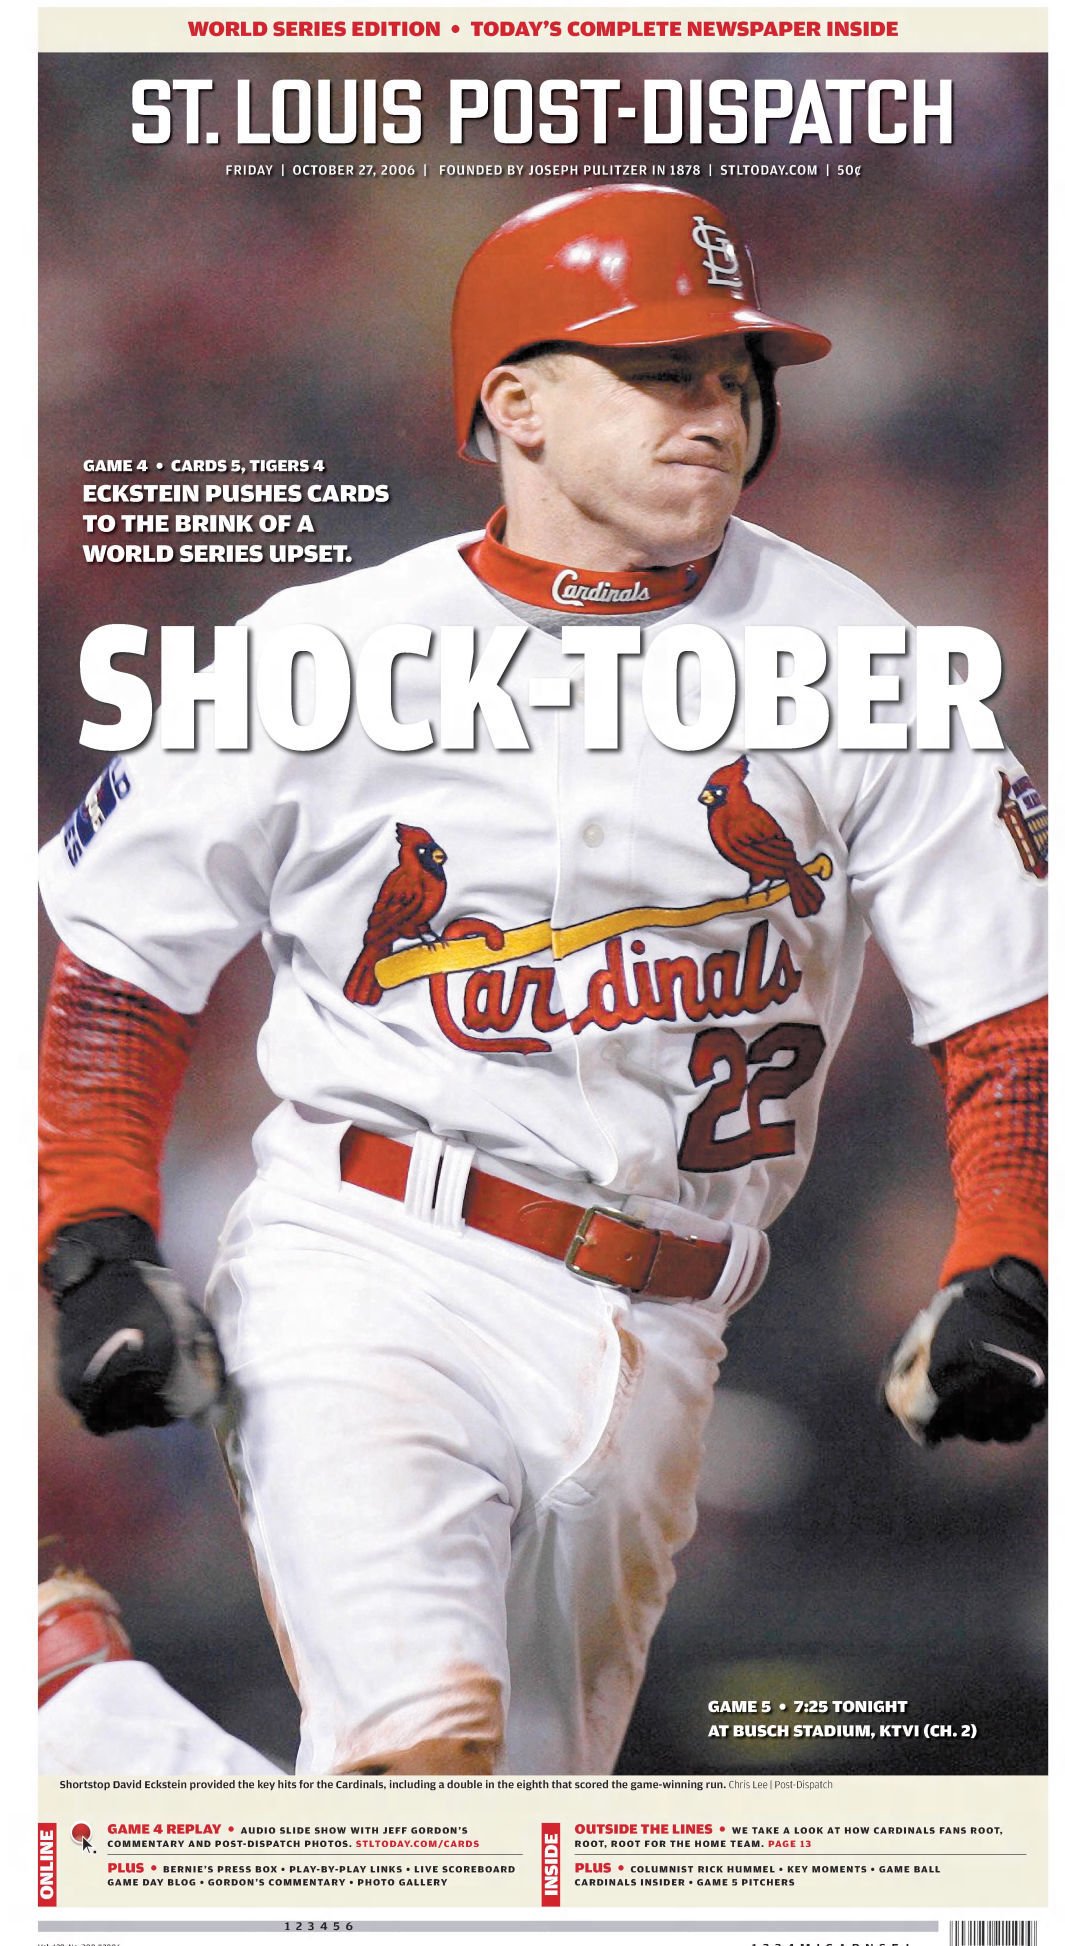 Tigers in 3? 16 years ago the Cardinals pulled off a postseason stunner